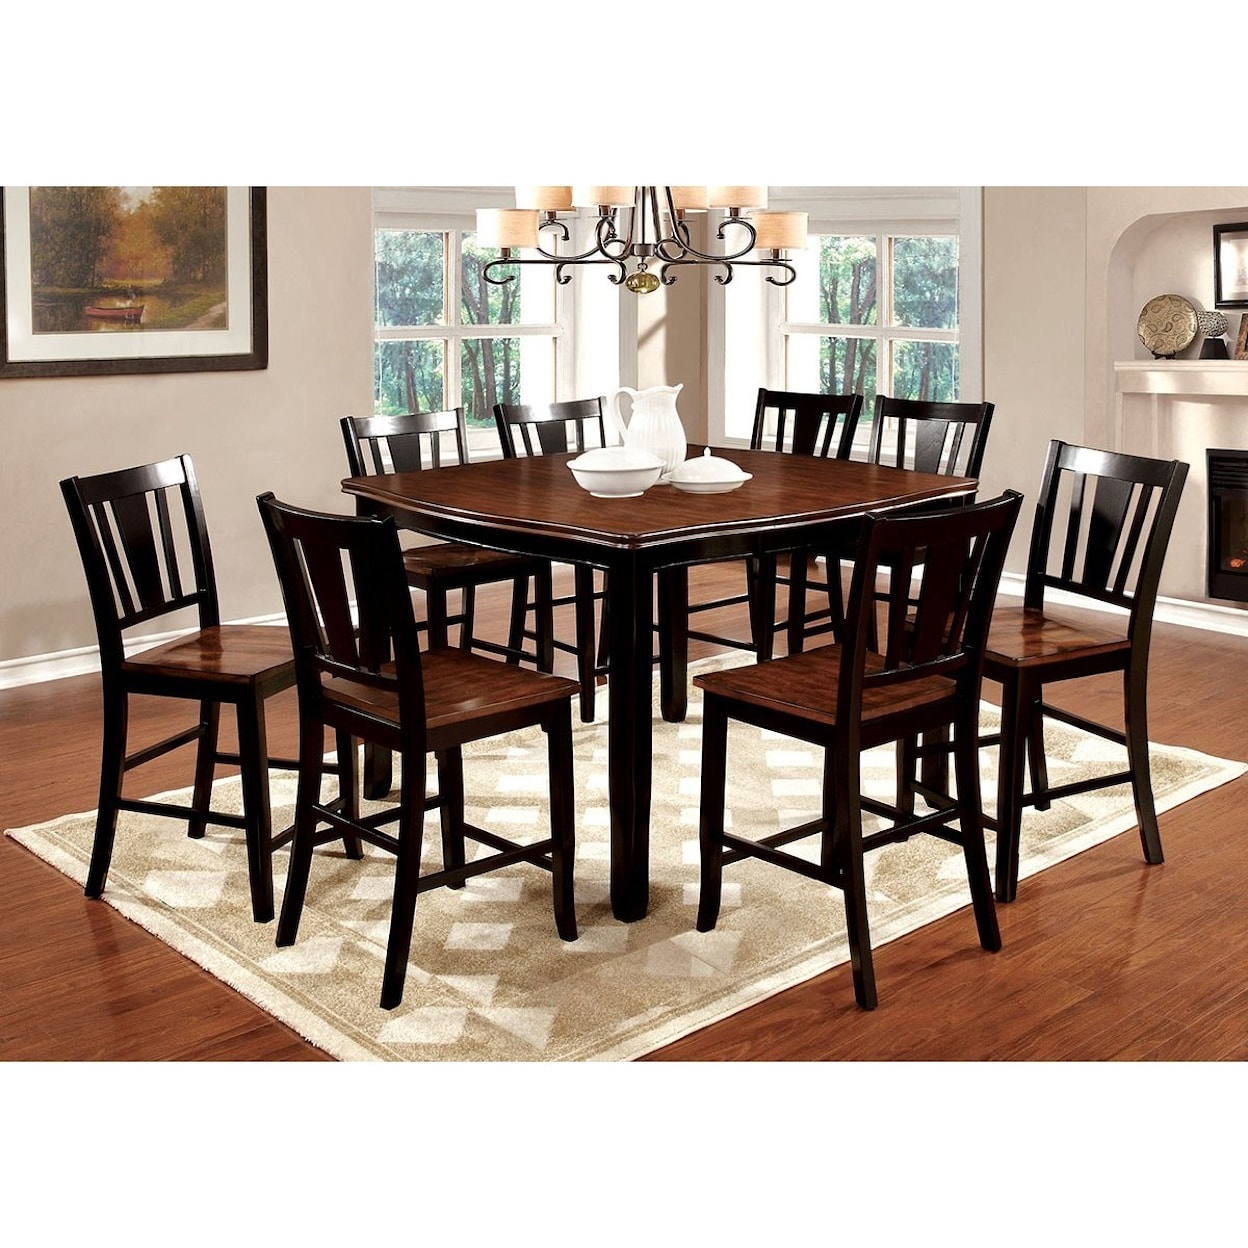 Furniture of America - FOA Dover II Table + 8 Side Chairs